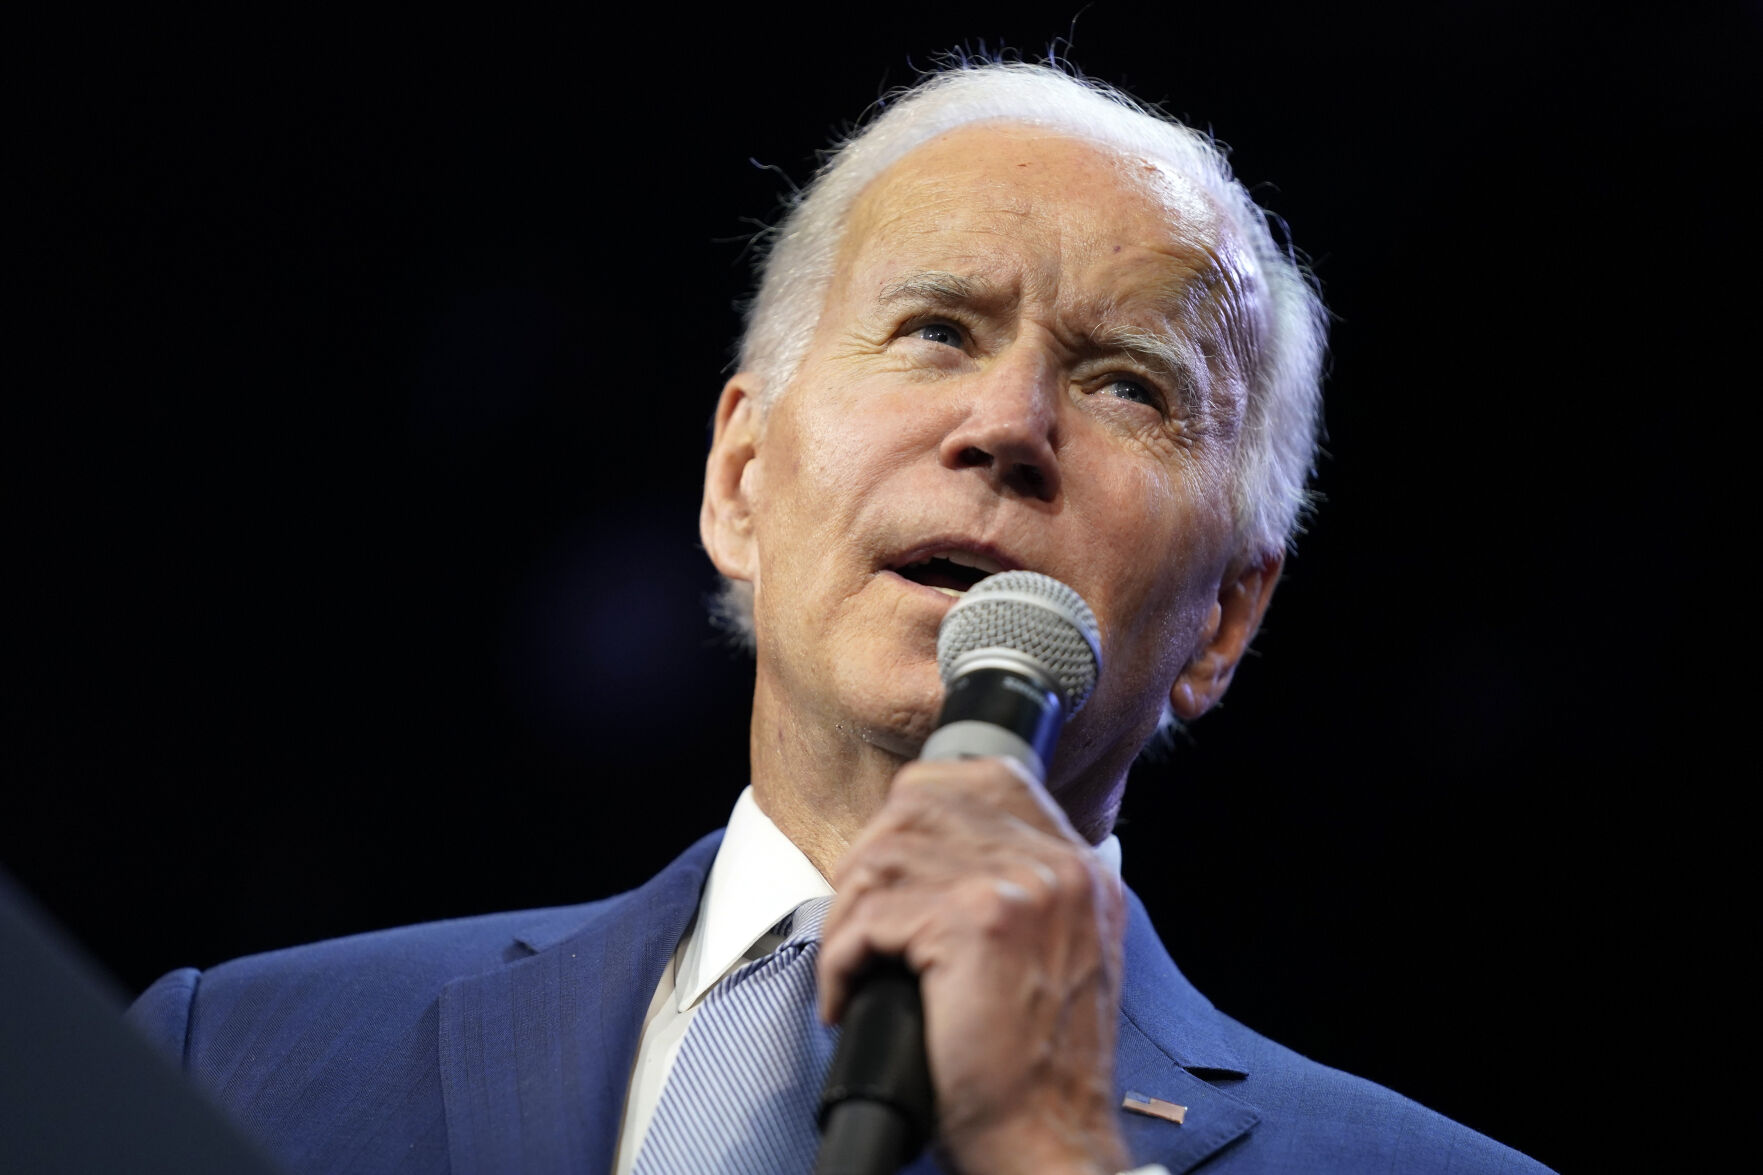 <p>President Joe Biden speaks during a Democratic National Committee event at the Howard Theatre, Tuesday, Oct. 18, 2022, in Washington. (AP Photo/Evan Vucci)</p>   PHOTO CREDIT: Evan Vucci - staff, AP